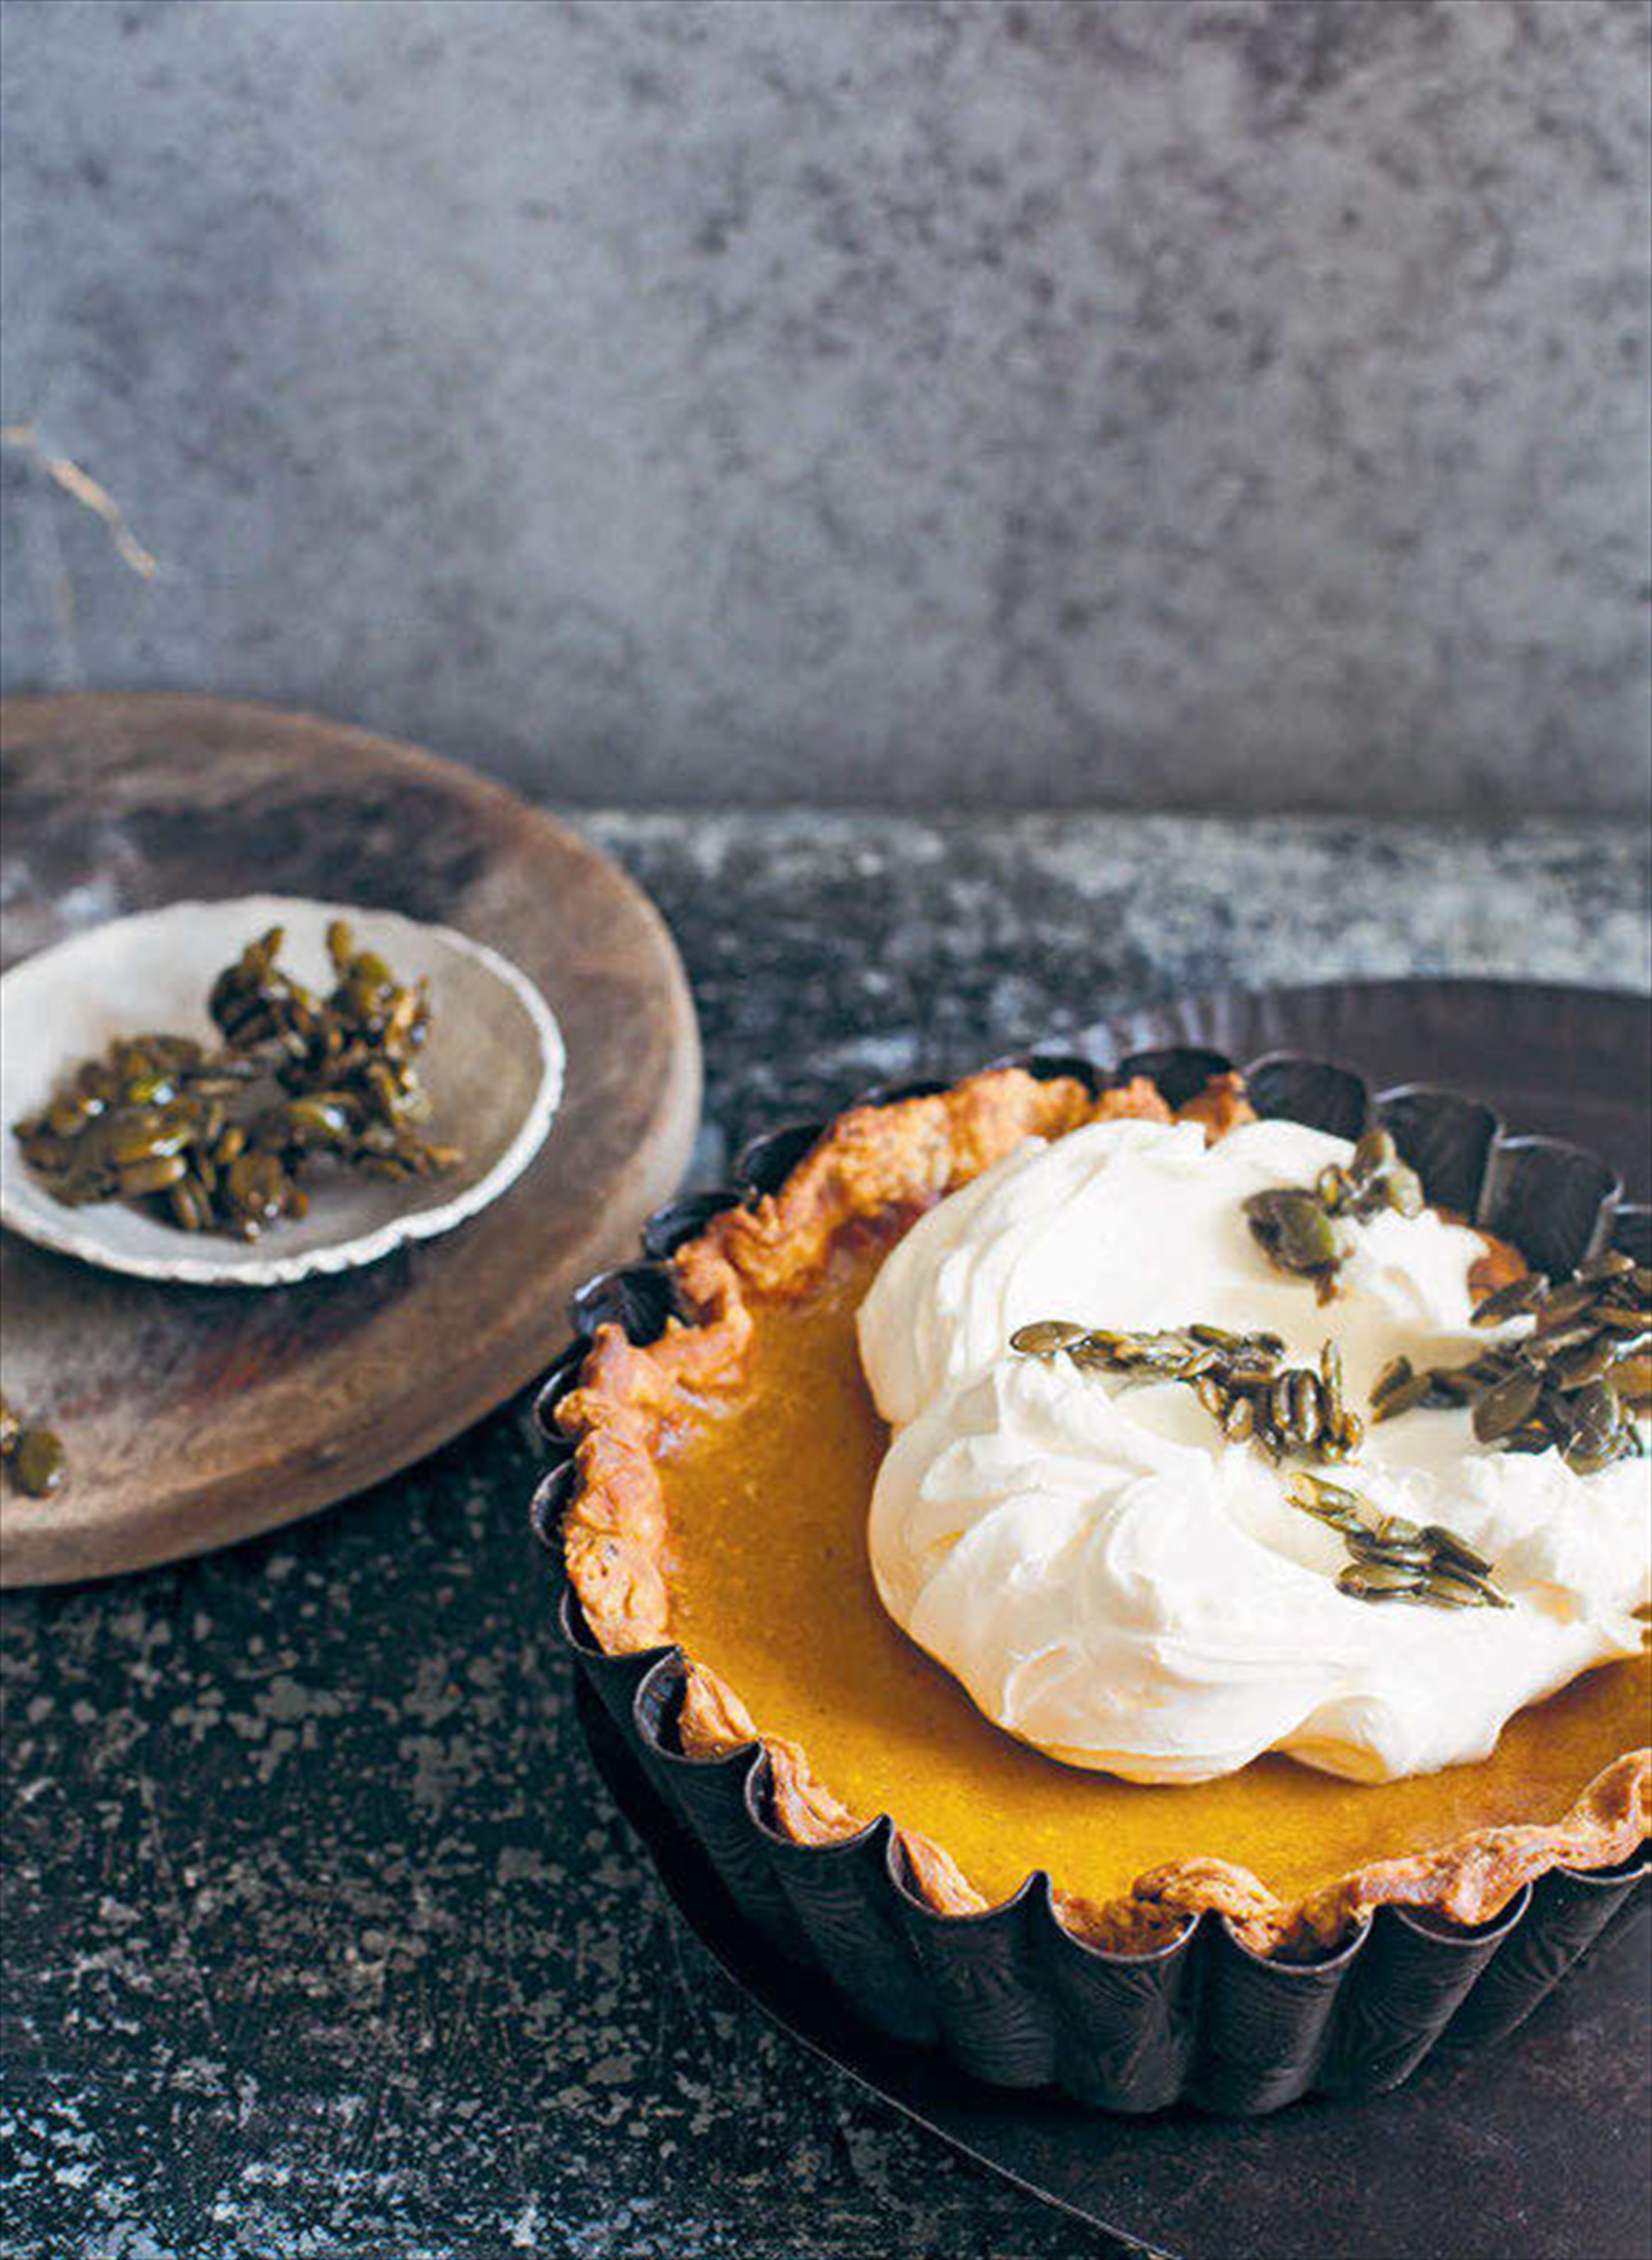 Pumpkin pie with candied pepitas